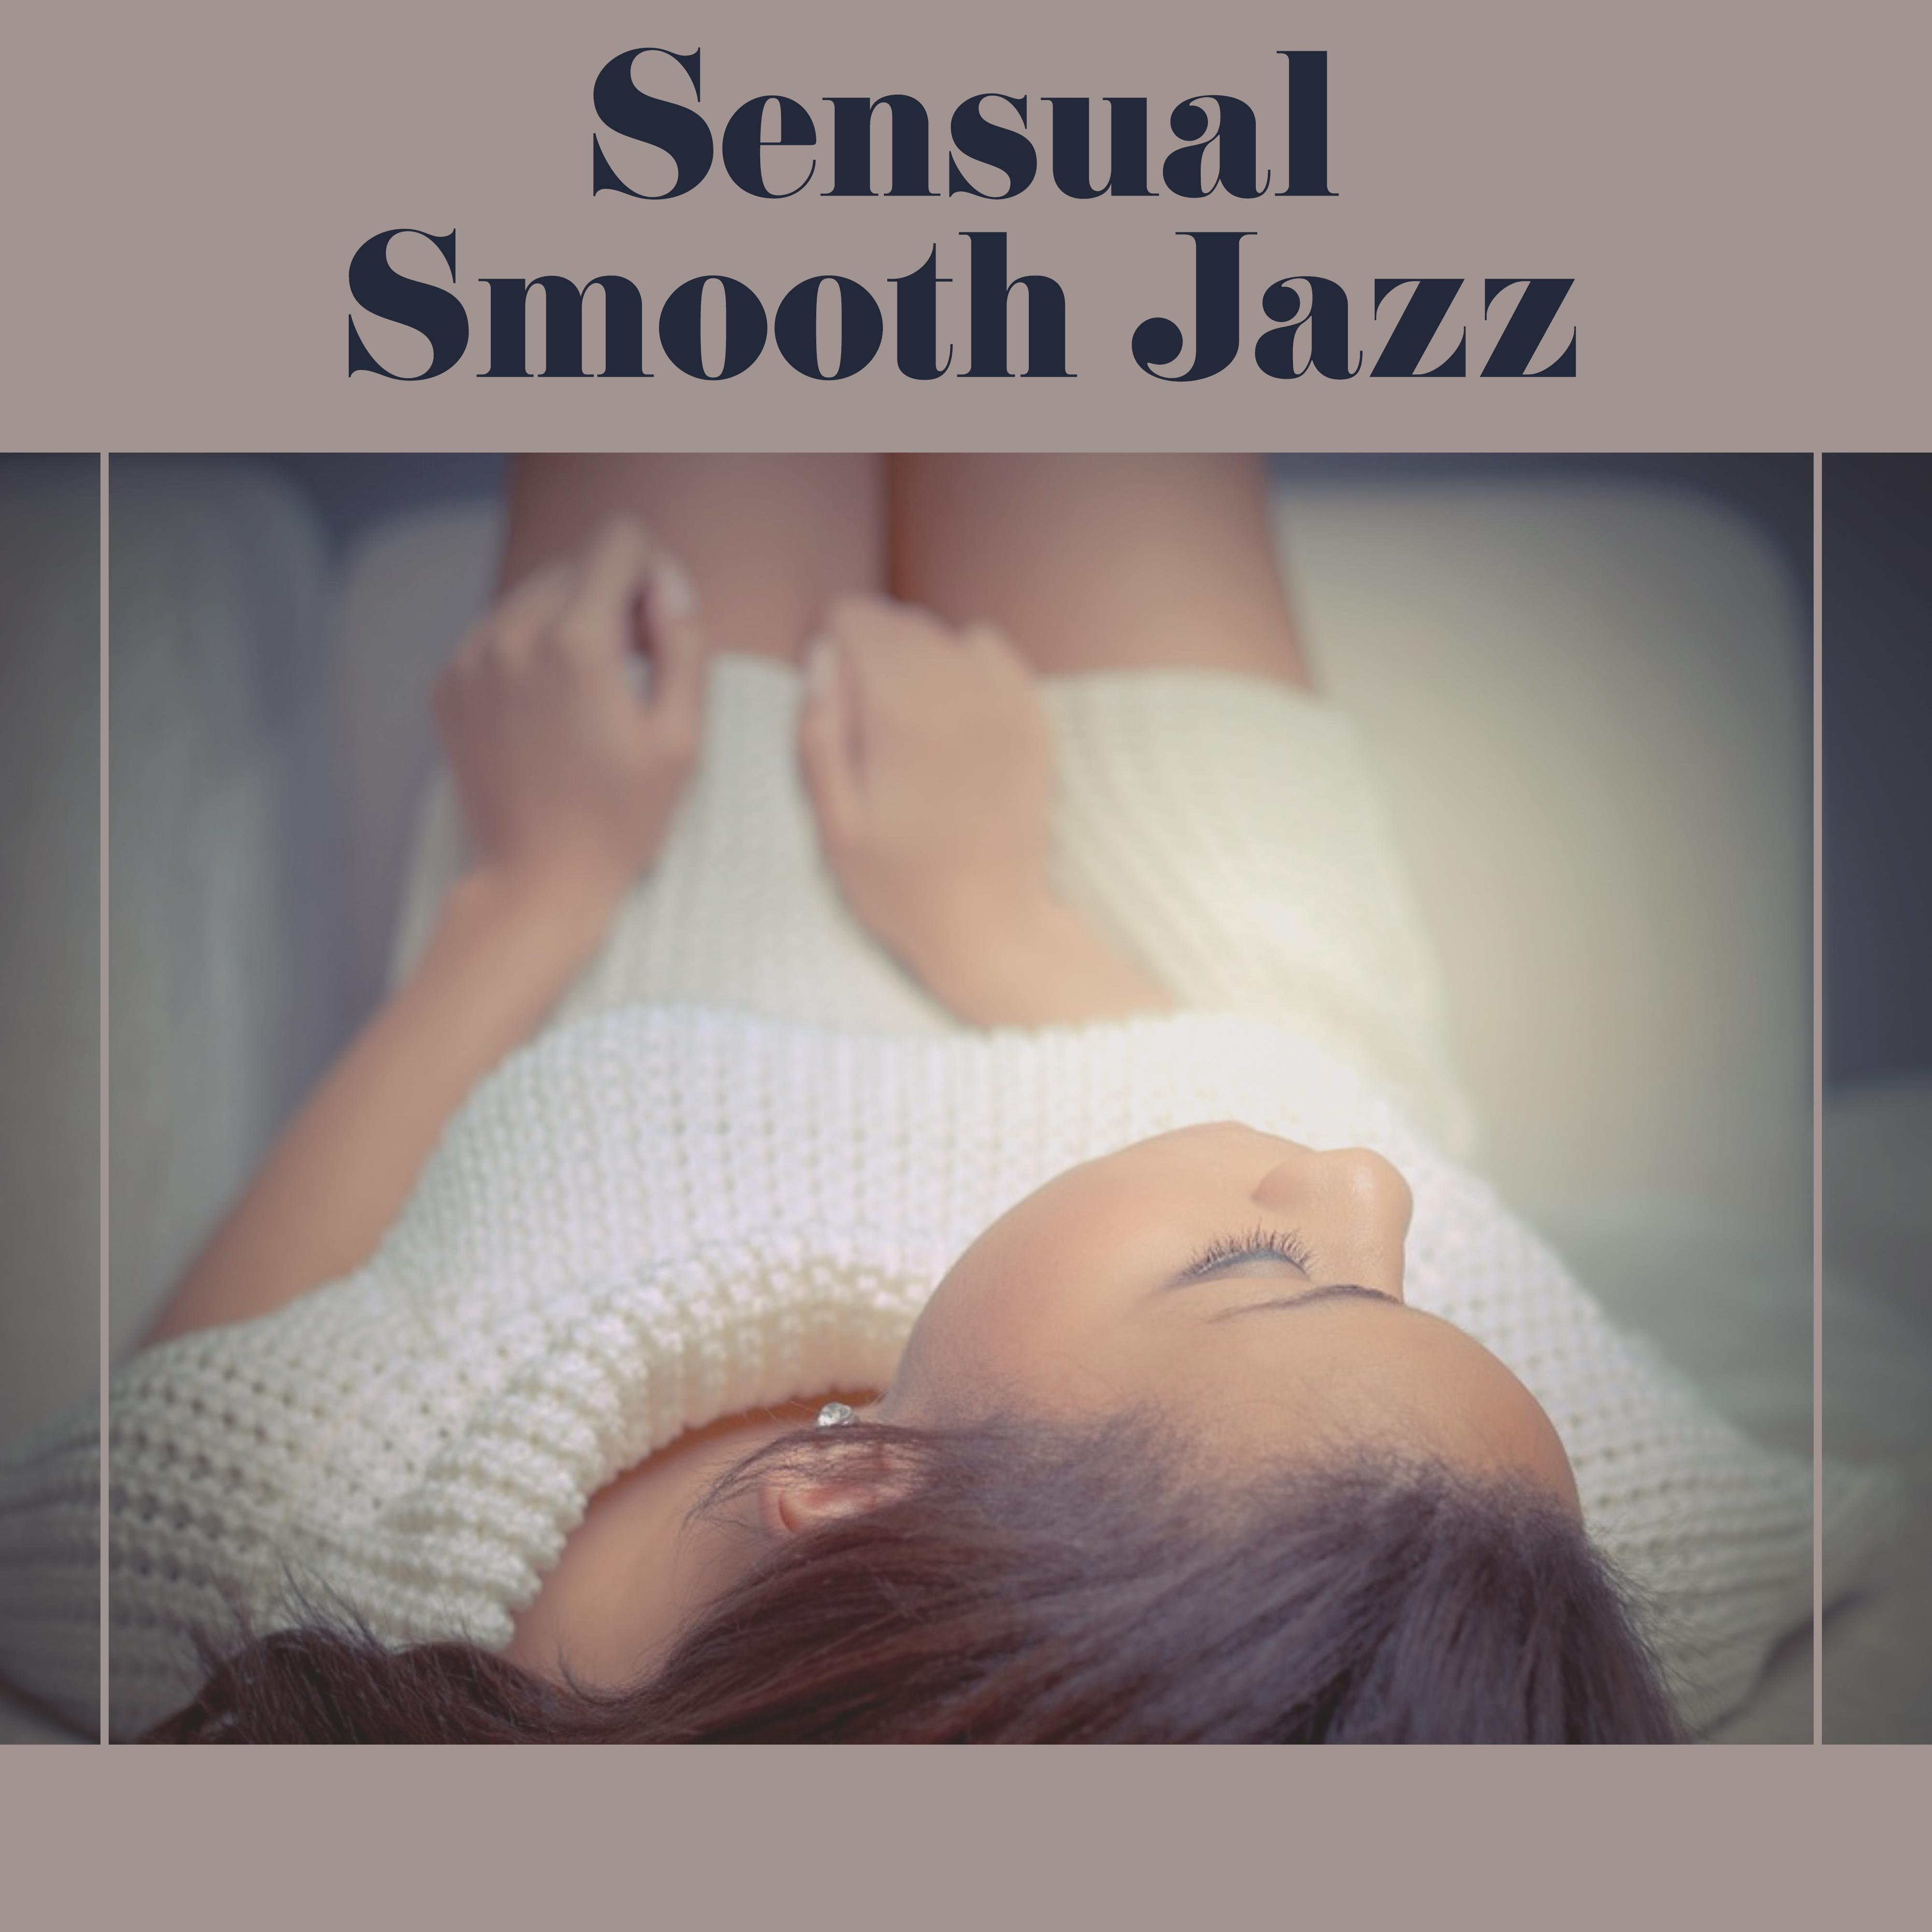 Sensual Smooth Jazz  Luxury Piano Music, Smooth Jazz Relaxation, Piano Ambient Music, Home Piano, Easy Listening Piano Music, Dinner Music